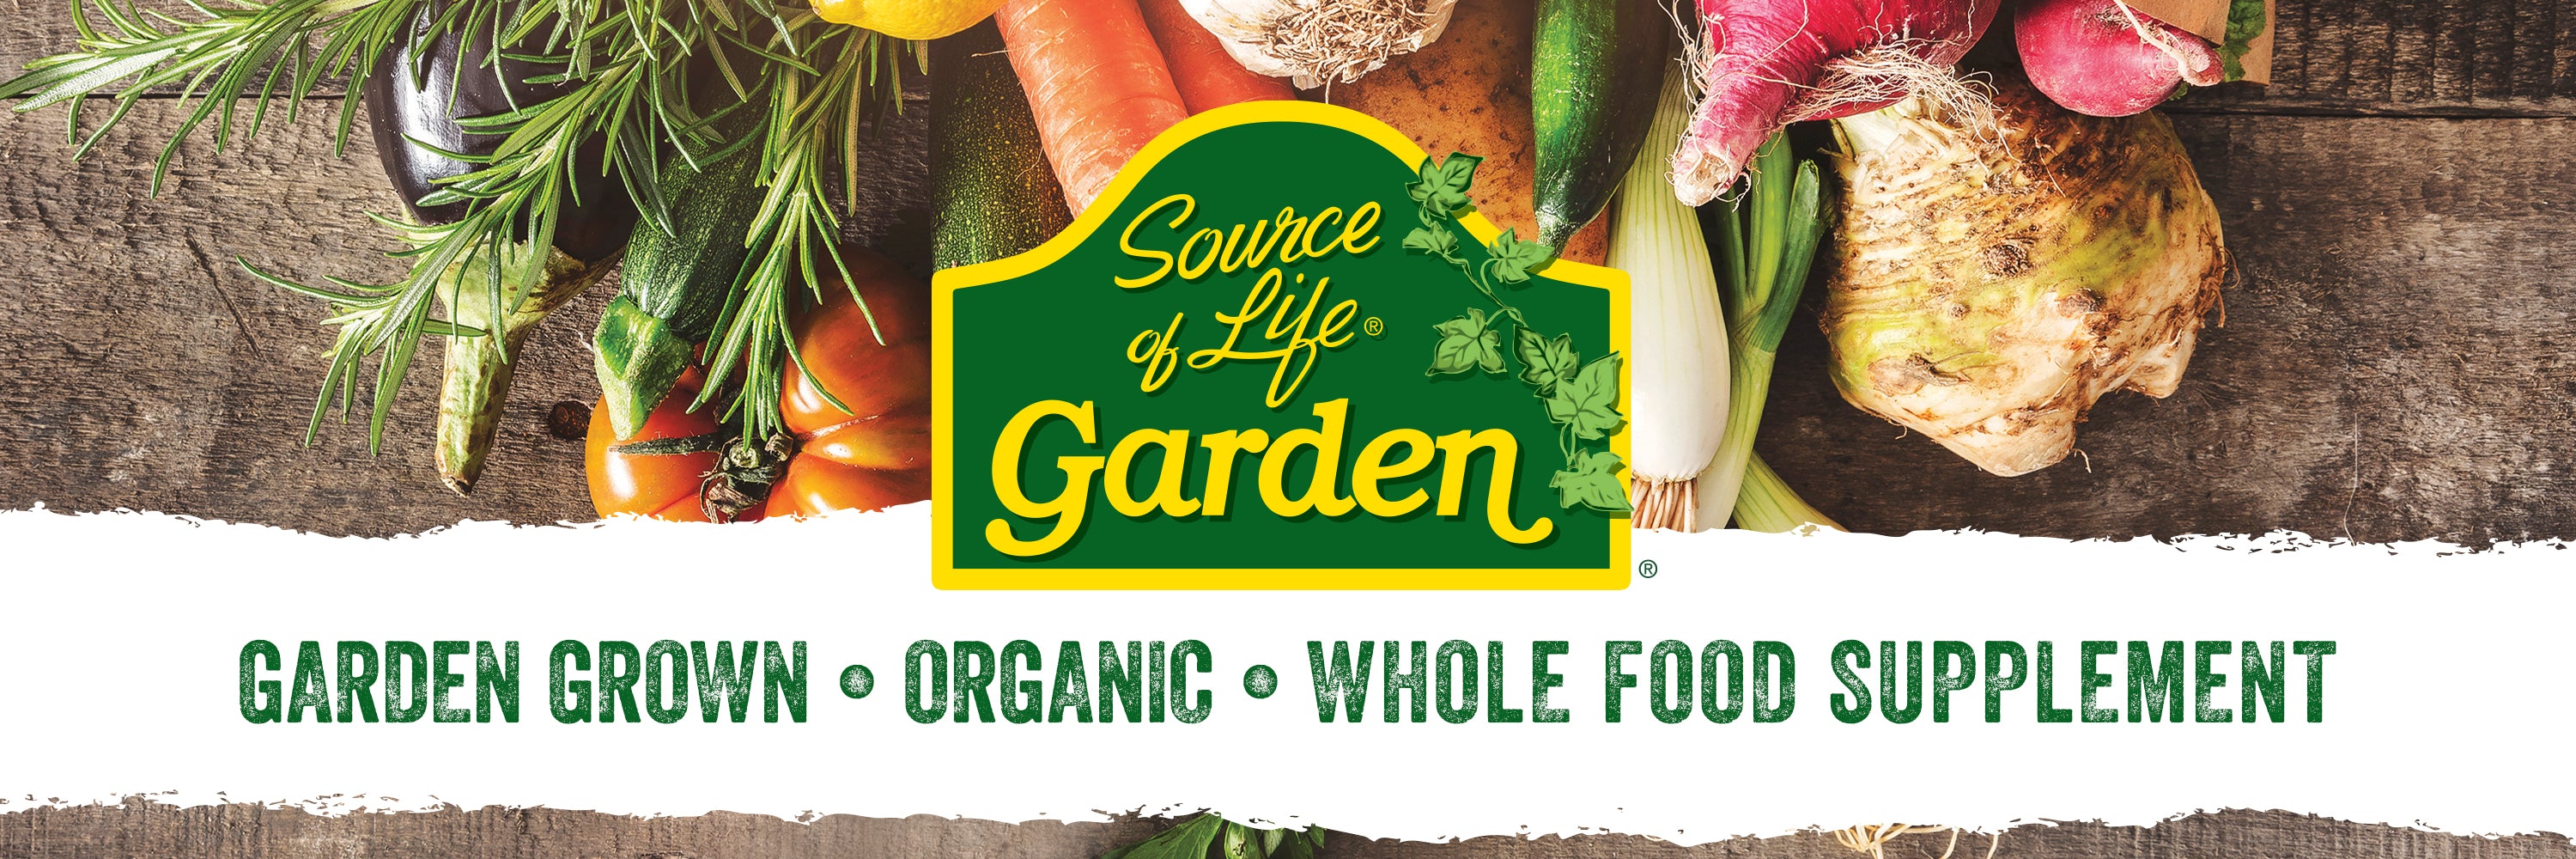 Source of Life Garden collection image banner